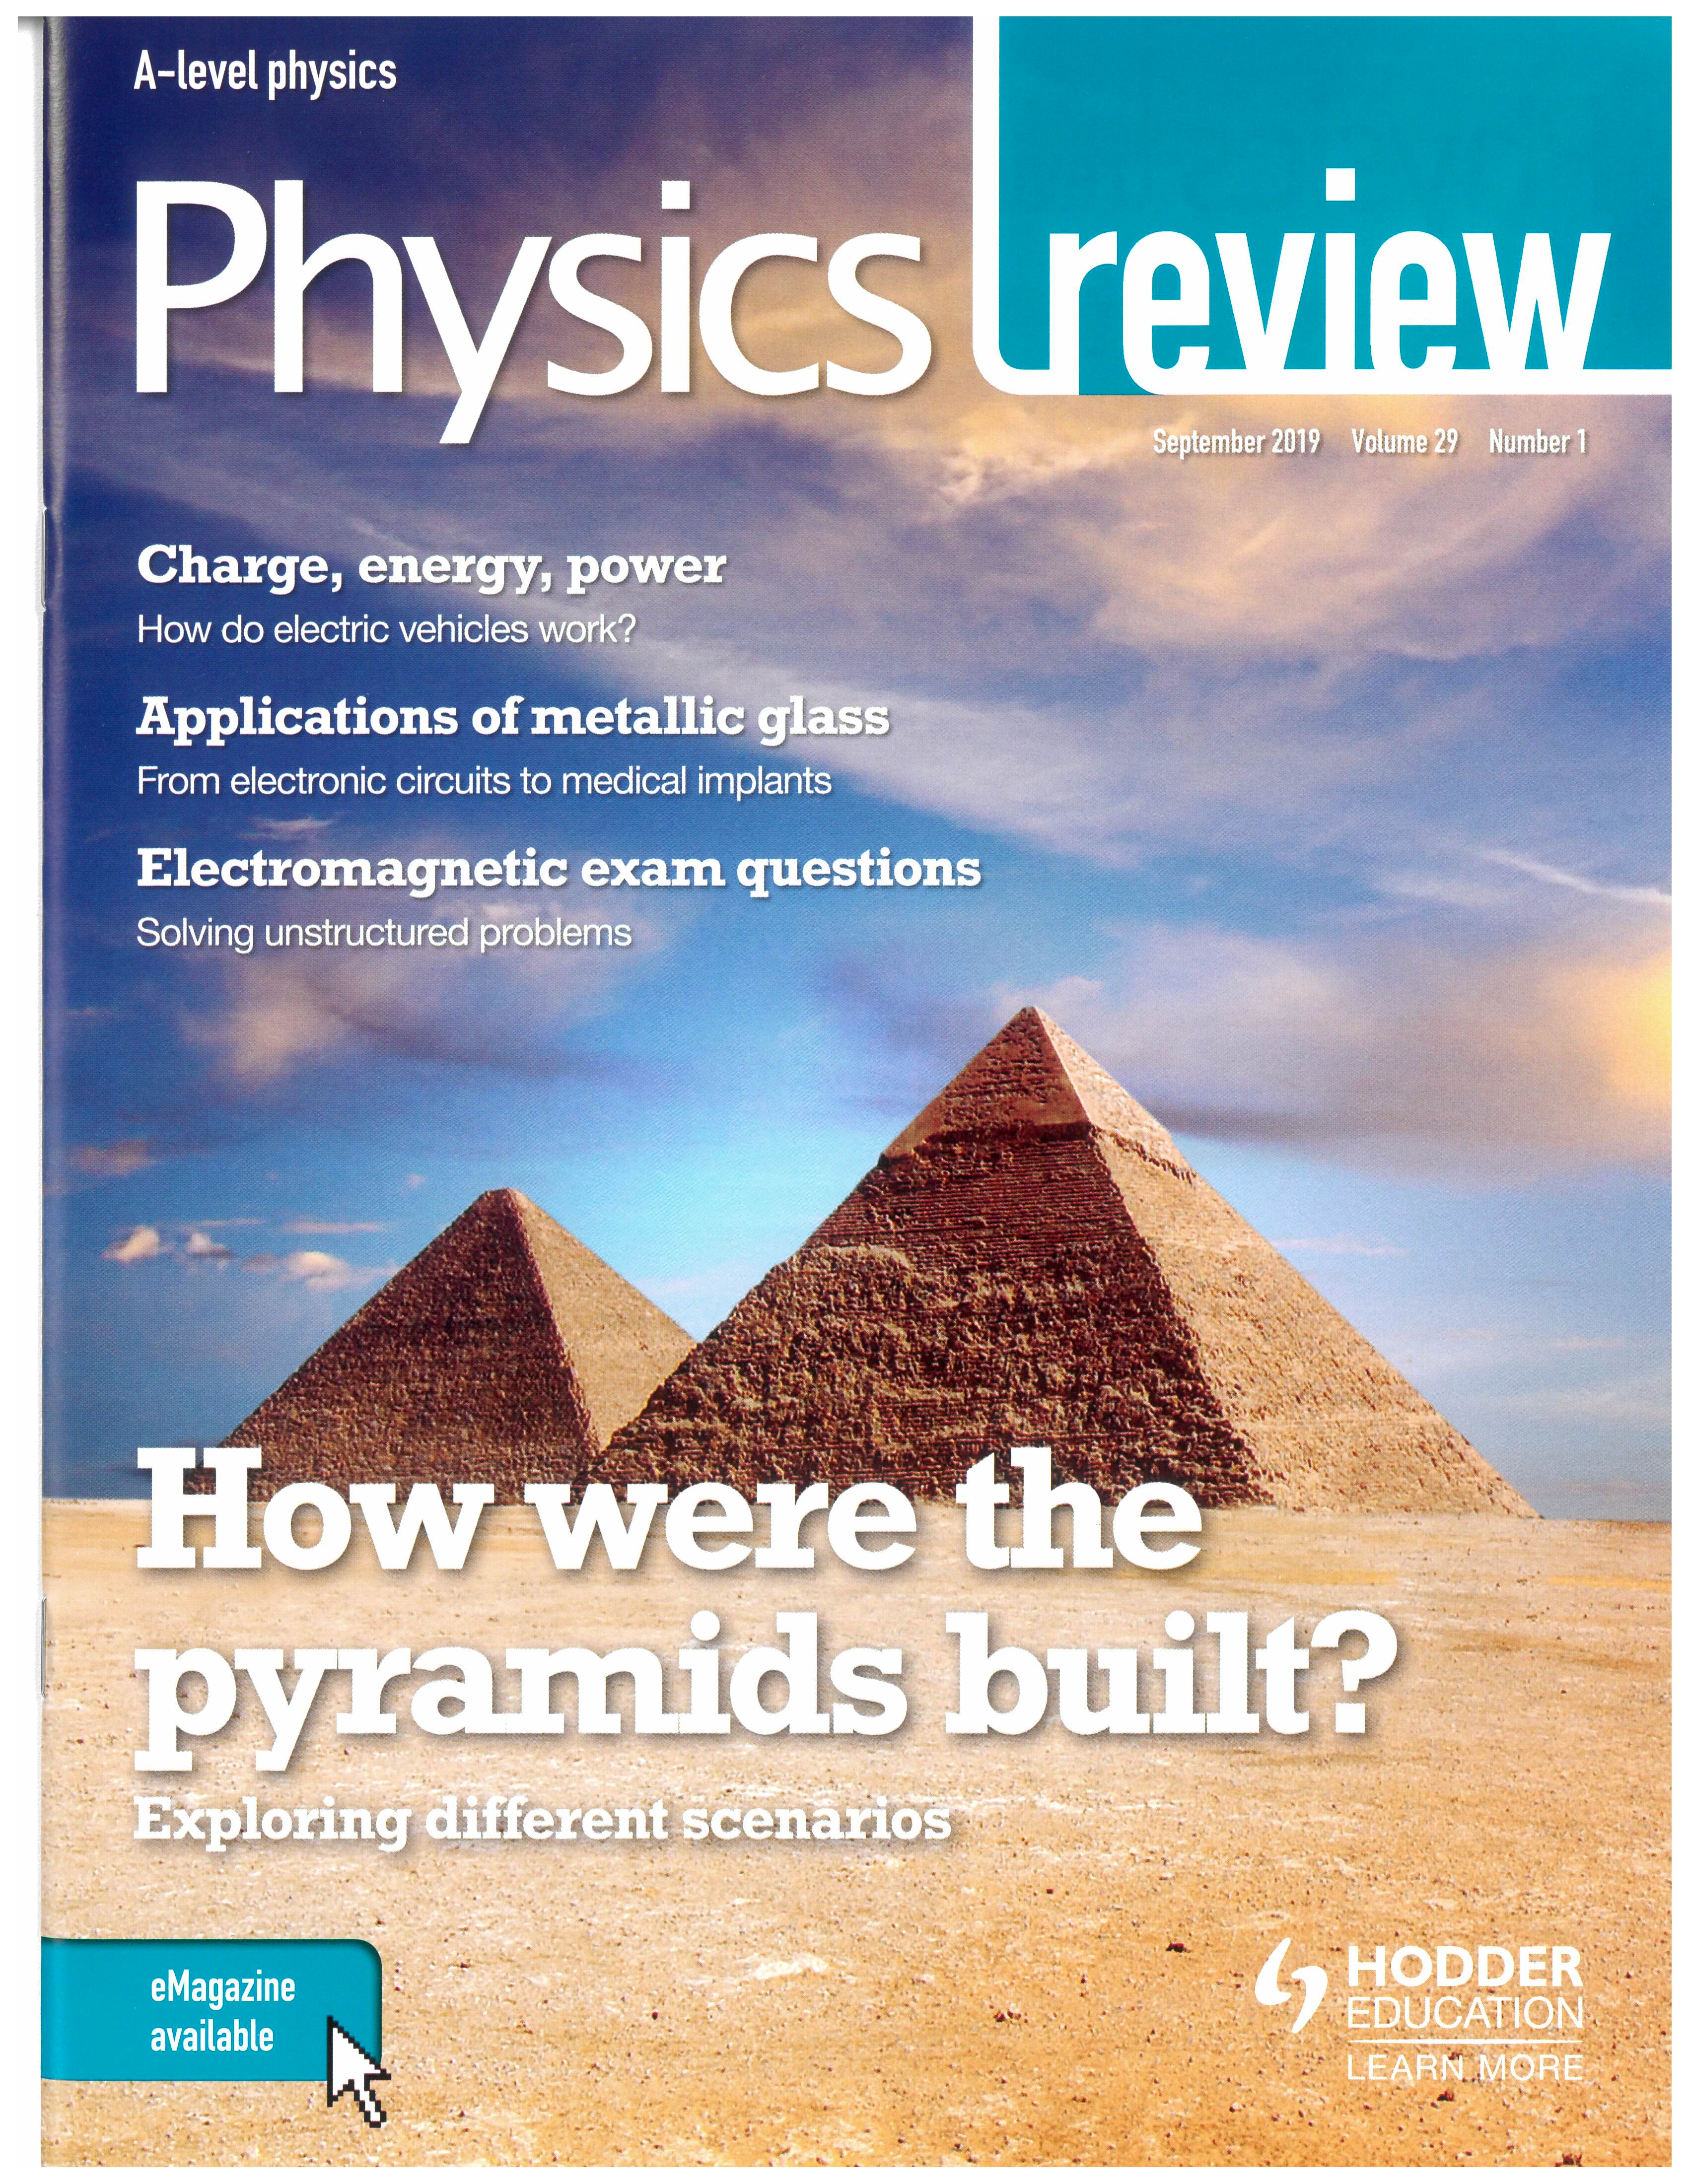 Image: Physics Review front cover